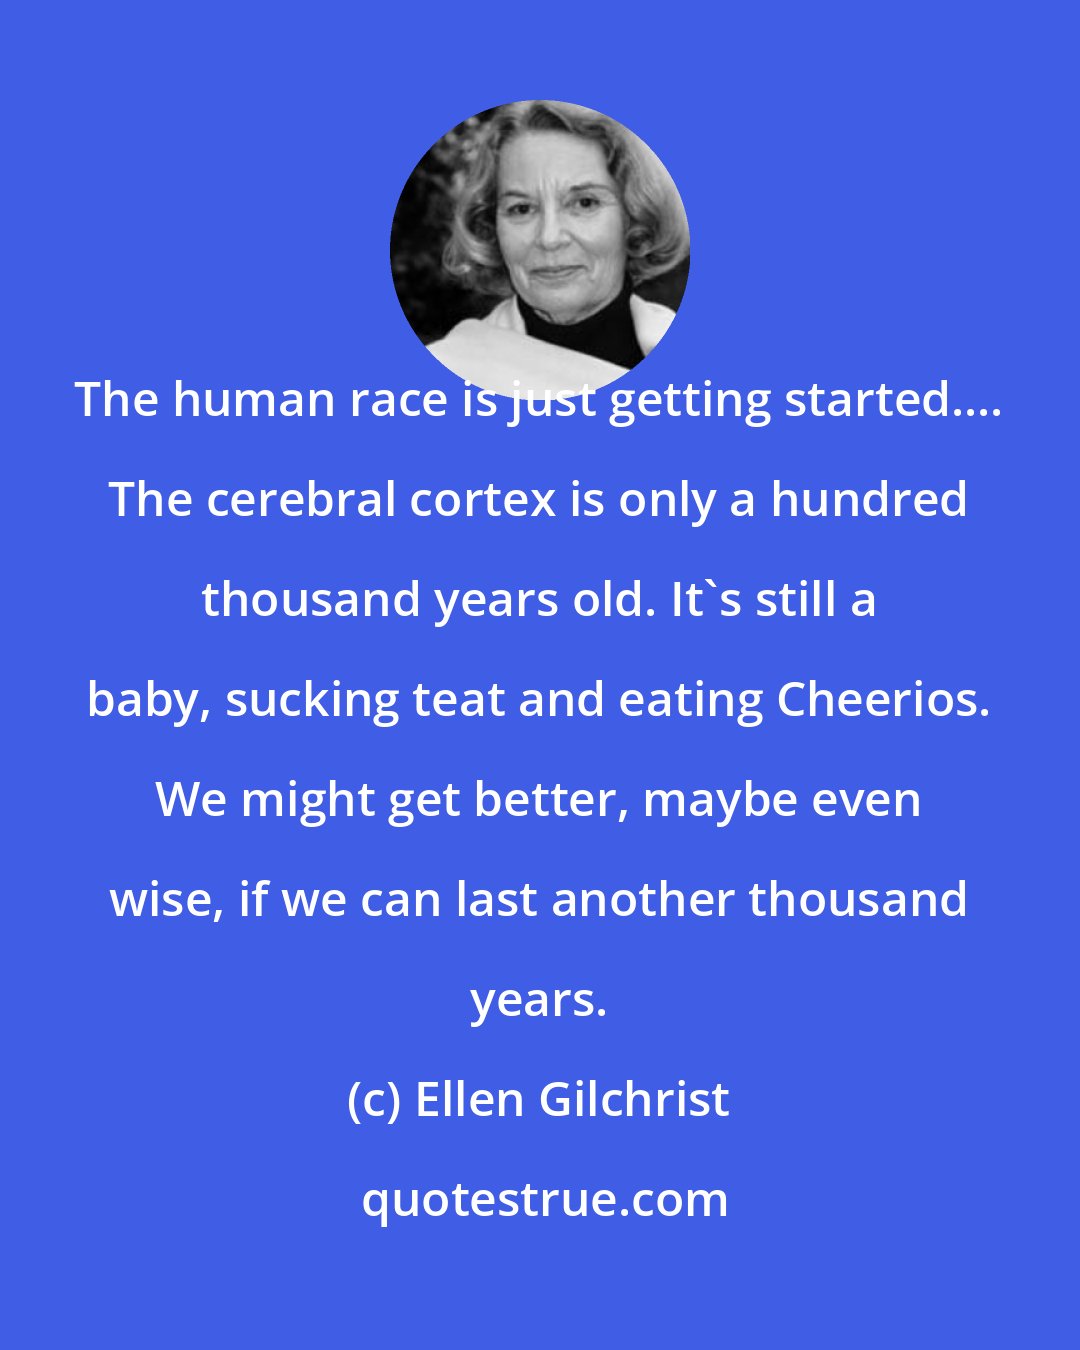 Ellen Gilchrist: The human race is just getting started.... The cerebral cortex is only a hundred thousand years old. It's still a baby, sucking teat and eating Cheerios. We might get better, maybe even wise, if we can last another thousand years.